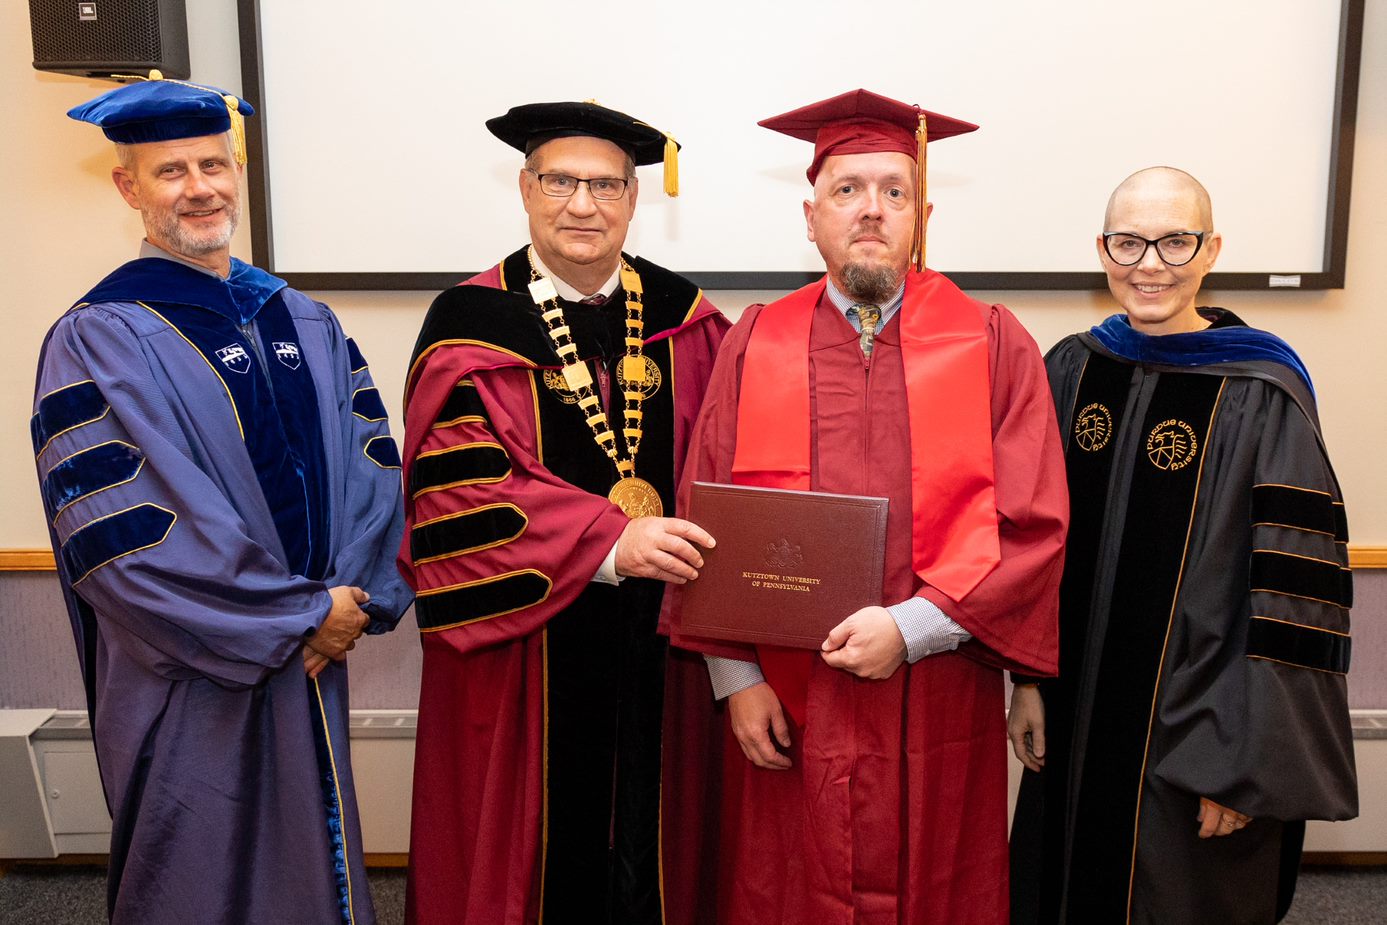 LAS Dean, President, and Provost with Rob Crites